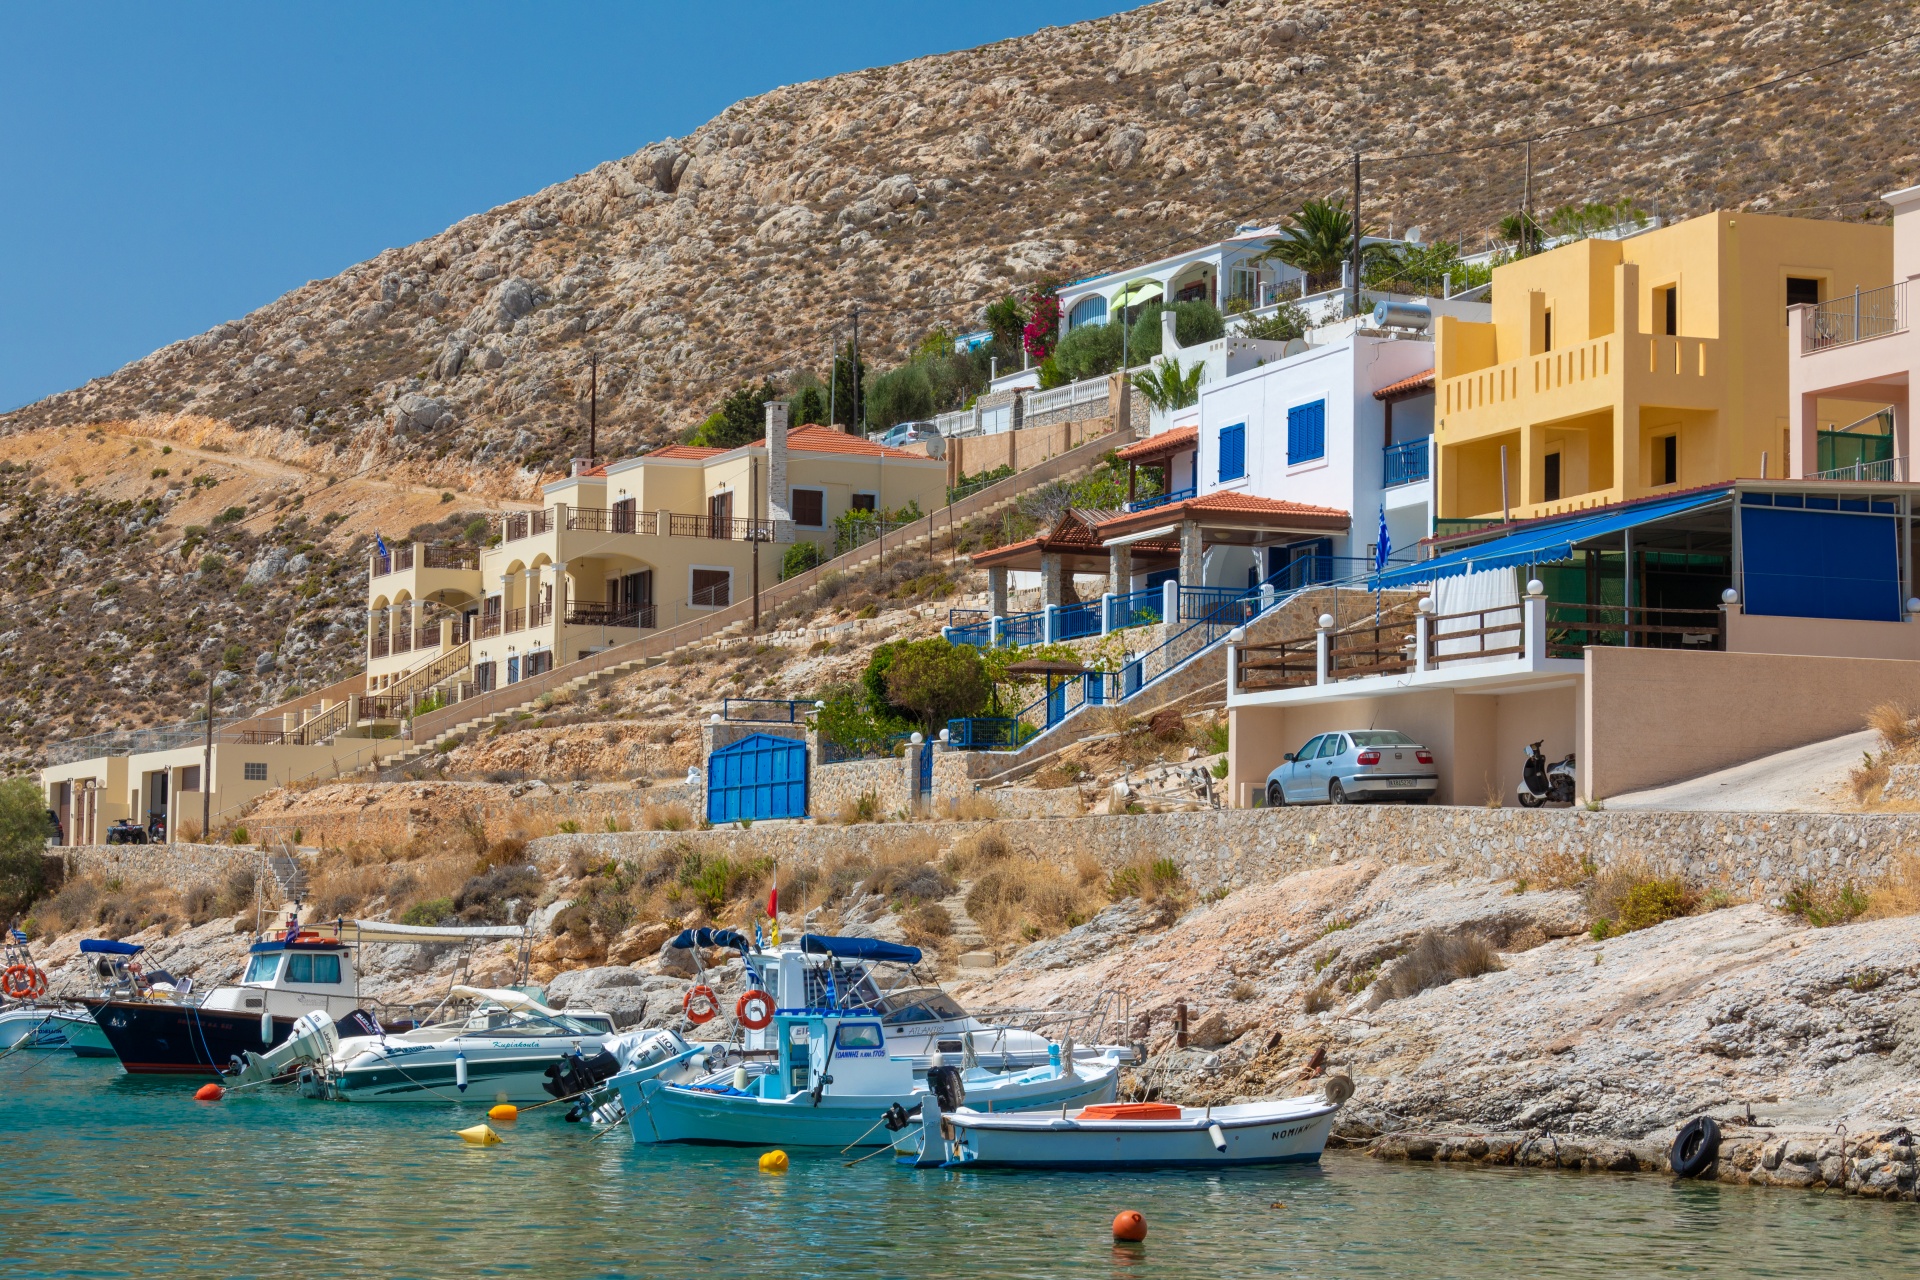 Mediterranean Houses And Boats